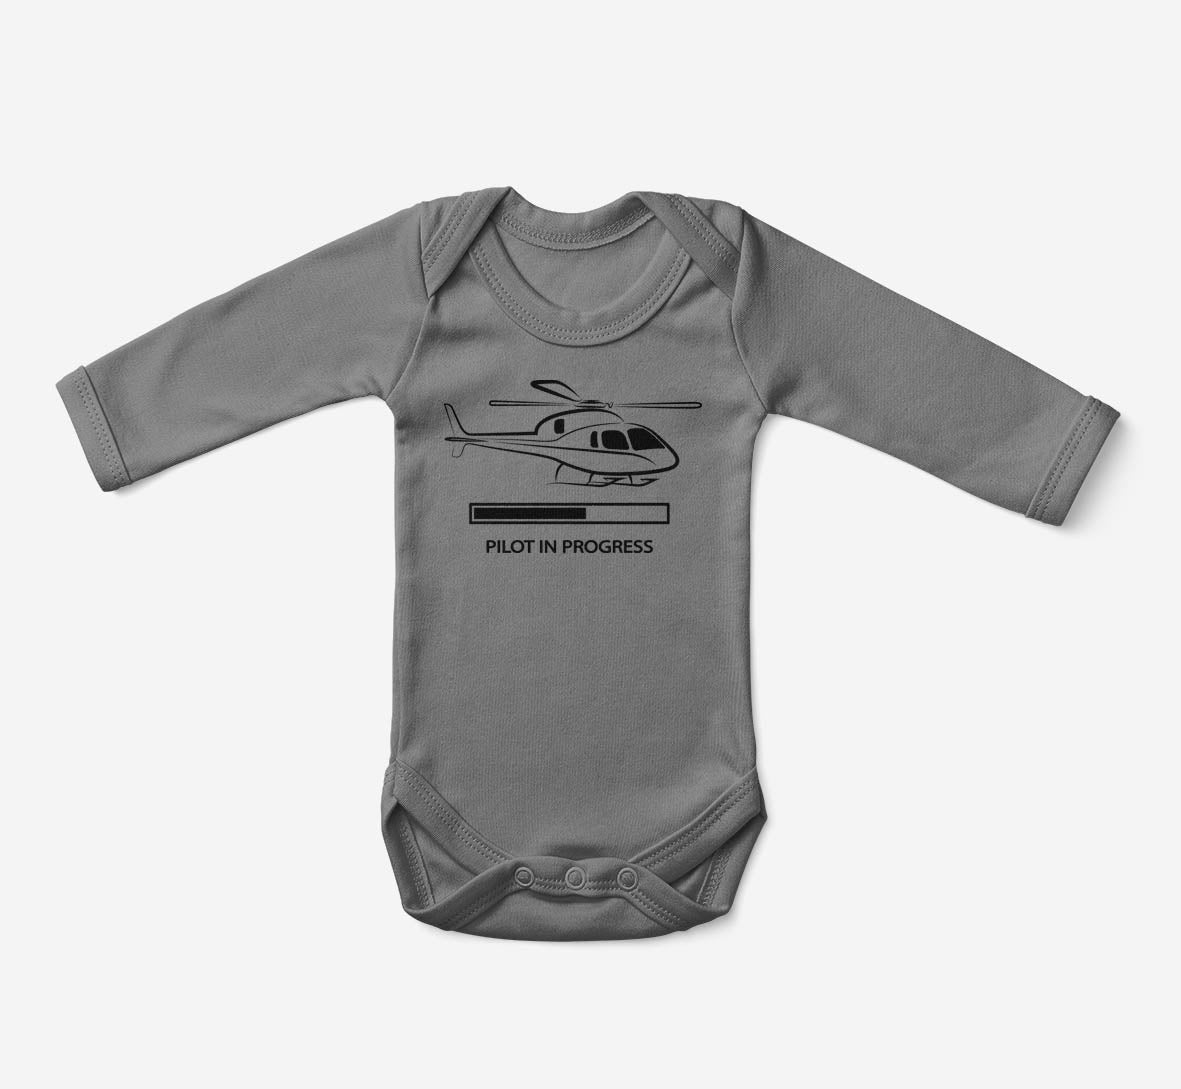 Pilot In Progress (Helicopter) Designed Baby Bodysuits